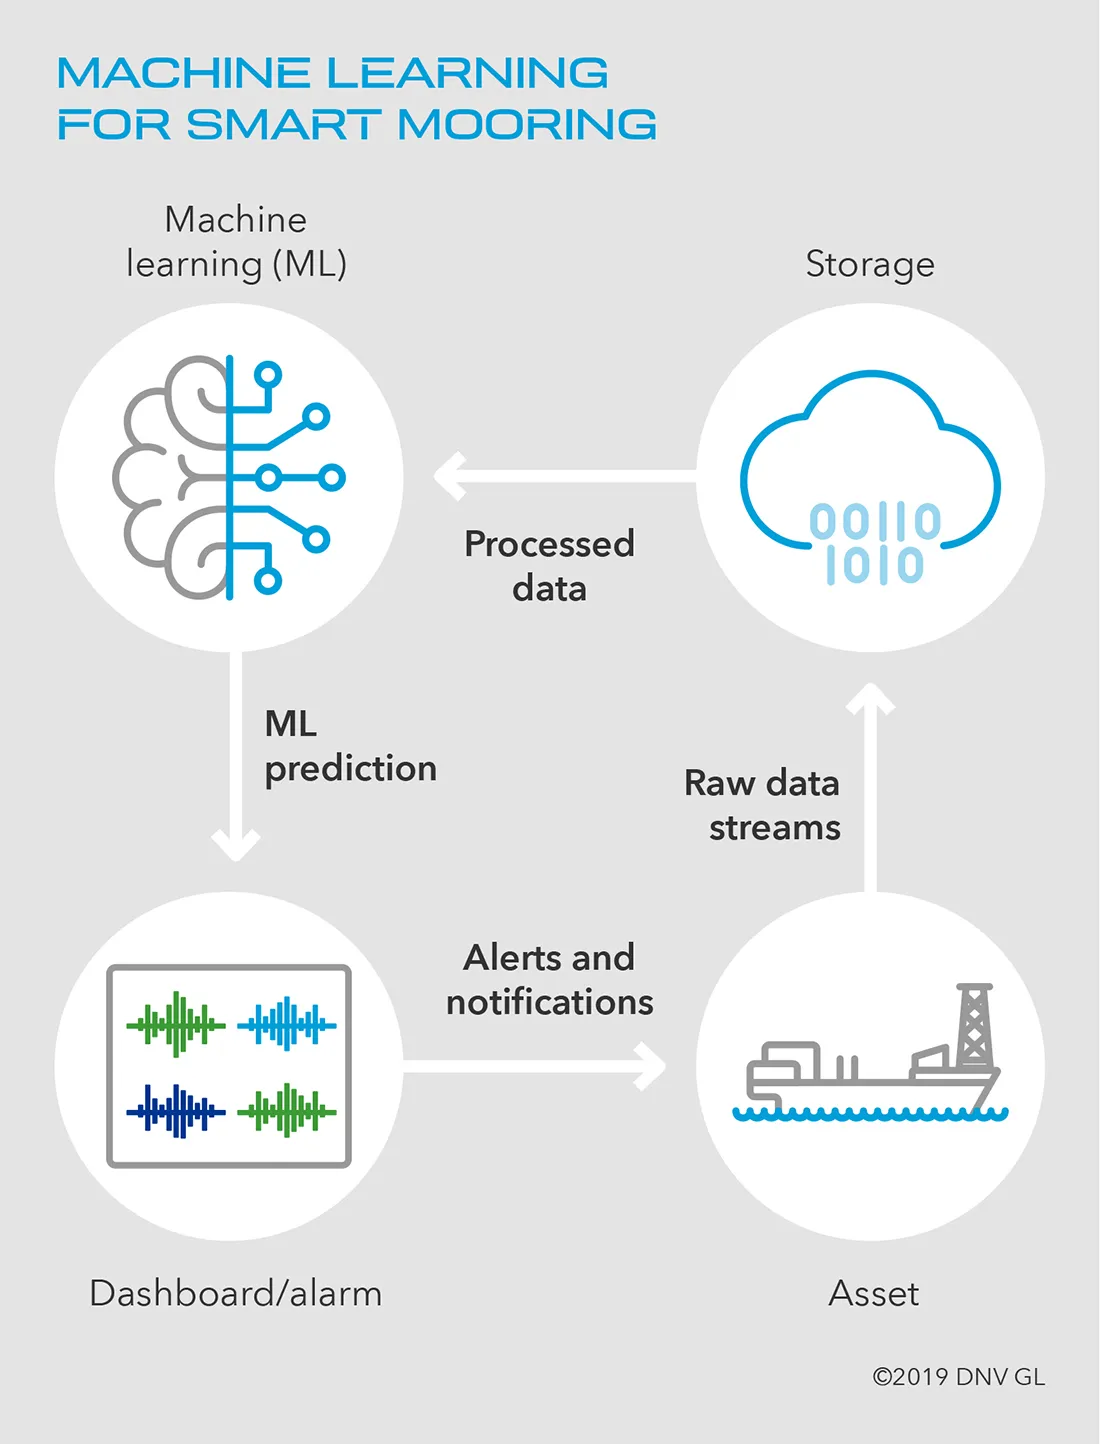 Figure 1: Machine learning for smart mooring